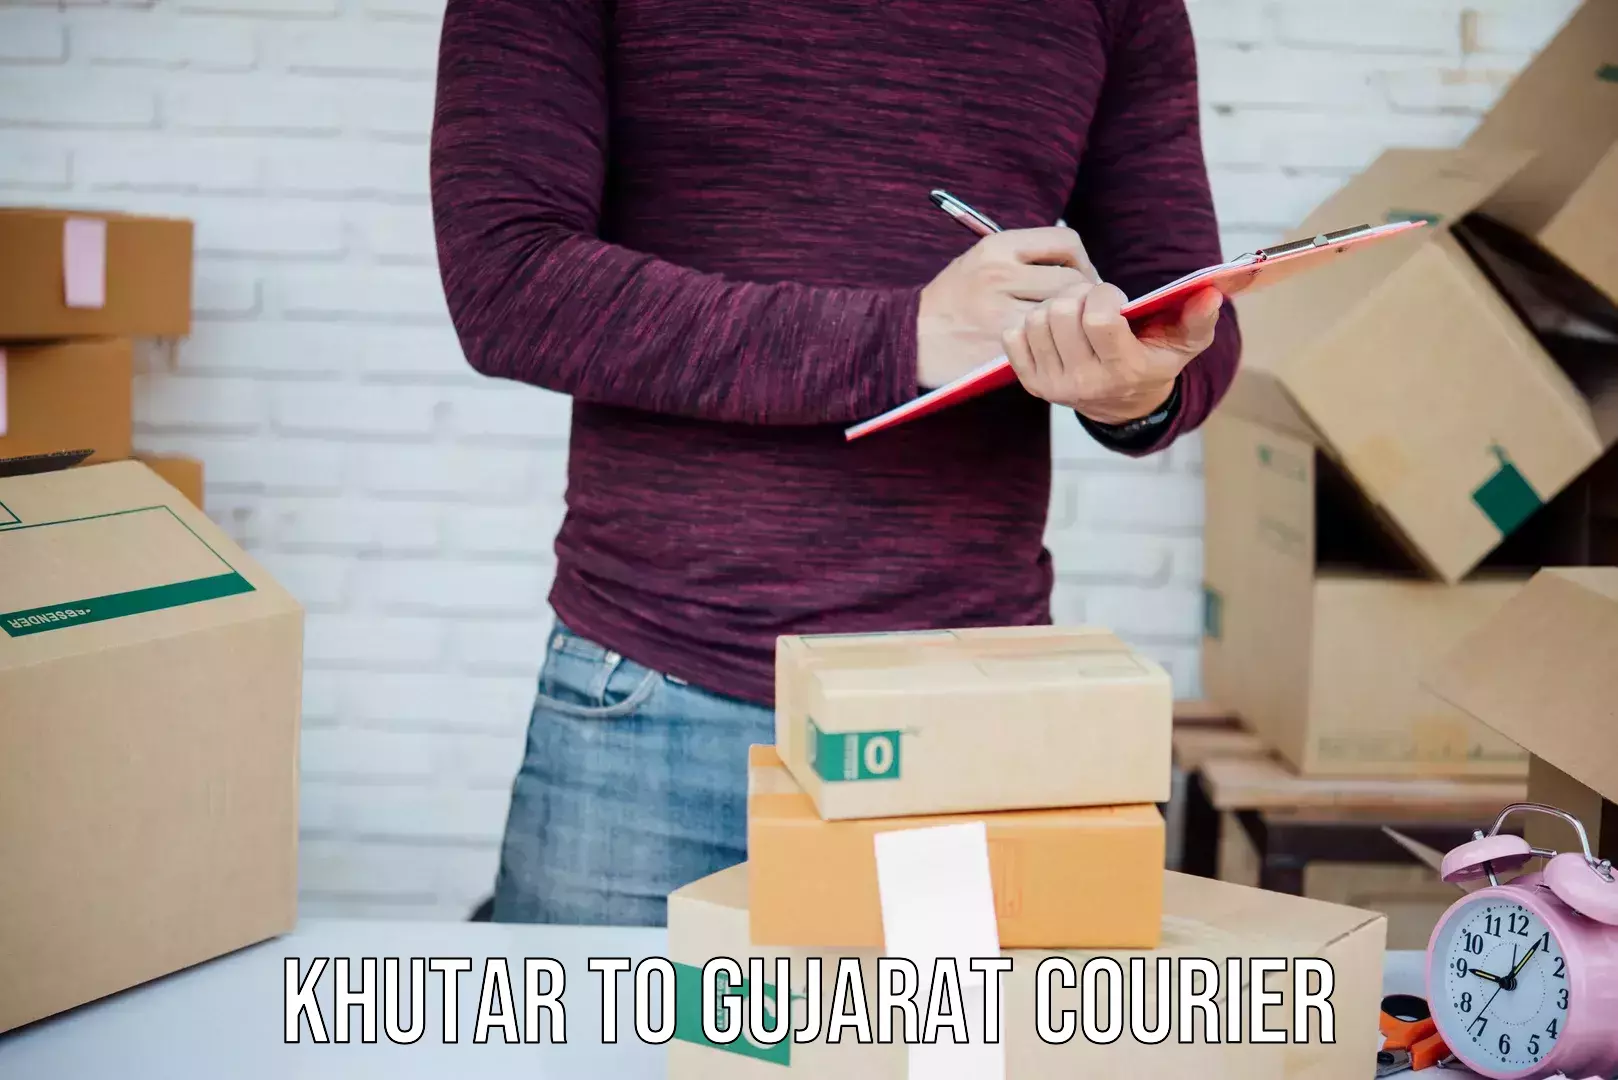 Quality courier partnerships Khutar to Gujarat